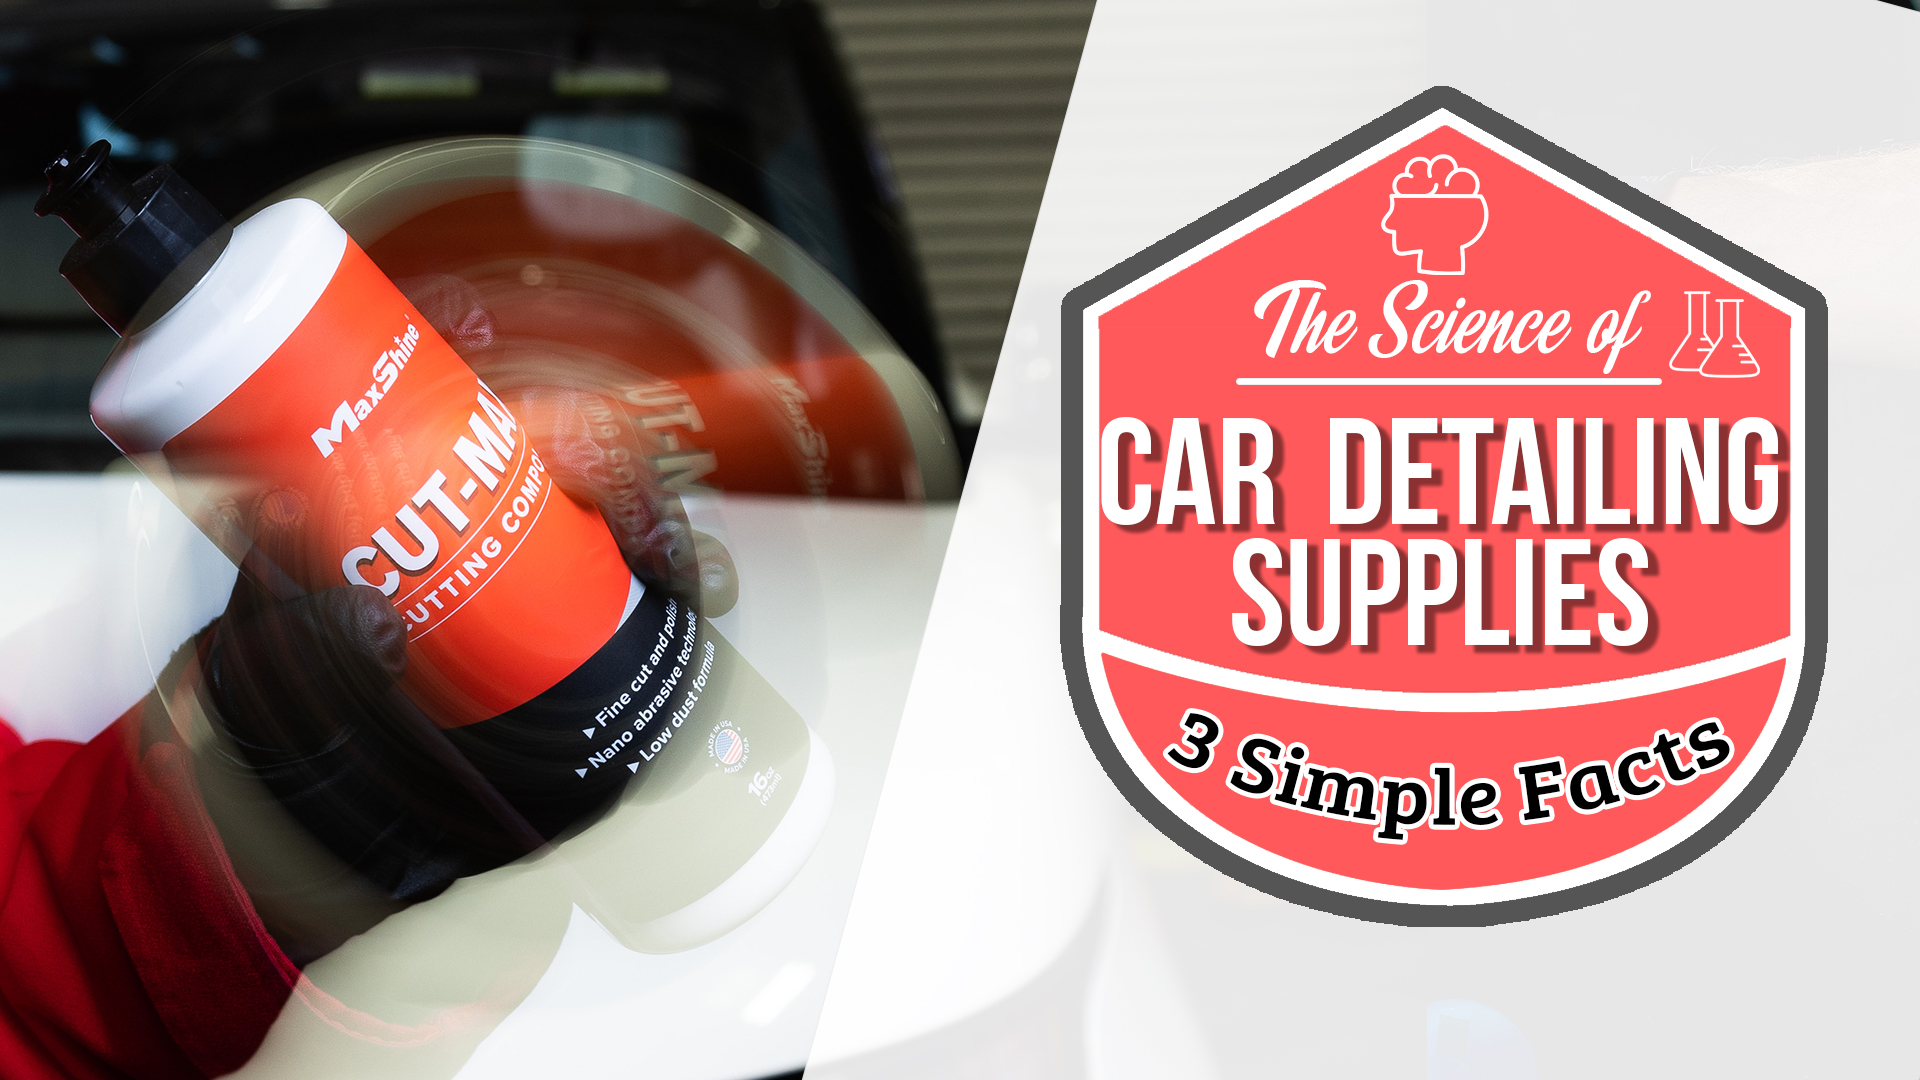 The Science of Car Detailing Supplies Article - Car Detailing blog